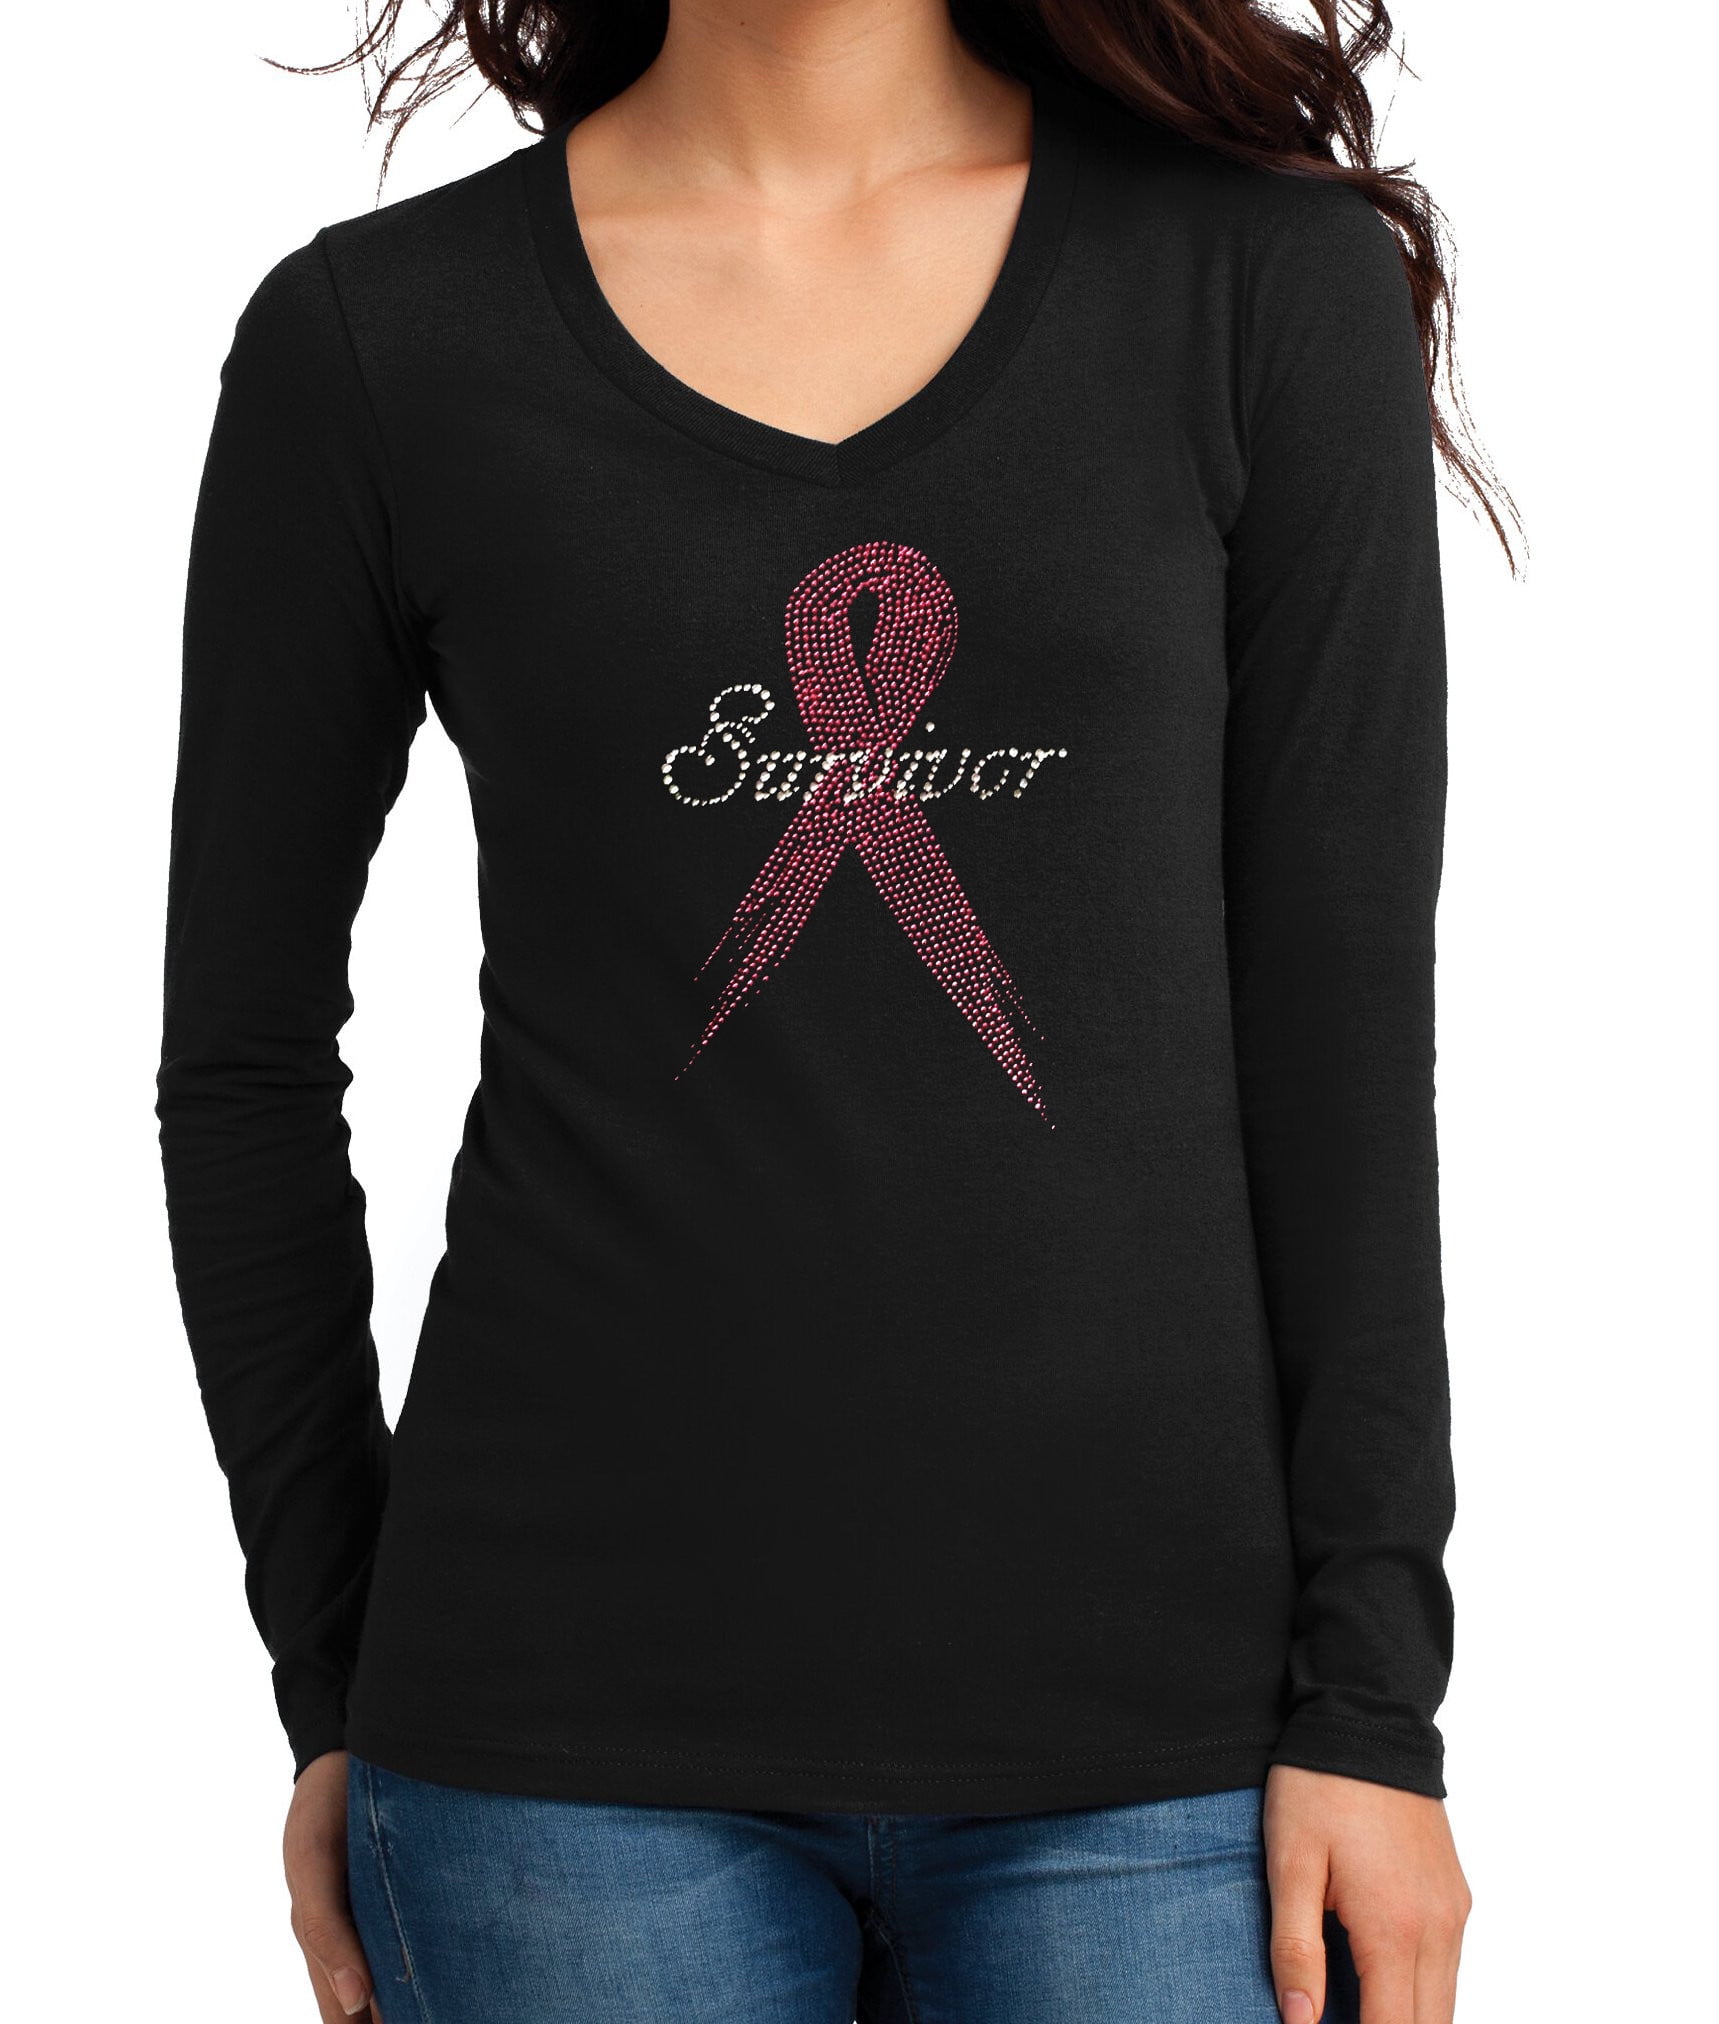 Rhinestone T-Shirt Pink Ribbon Believe Breast Cancer Awareness Size Small to 3XL